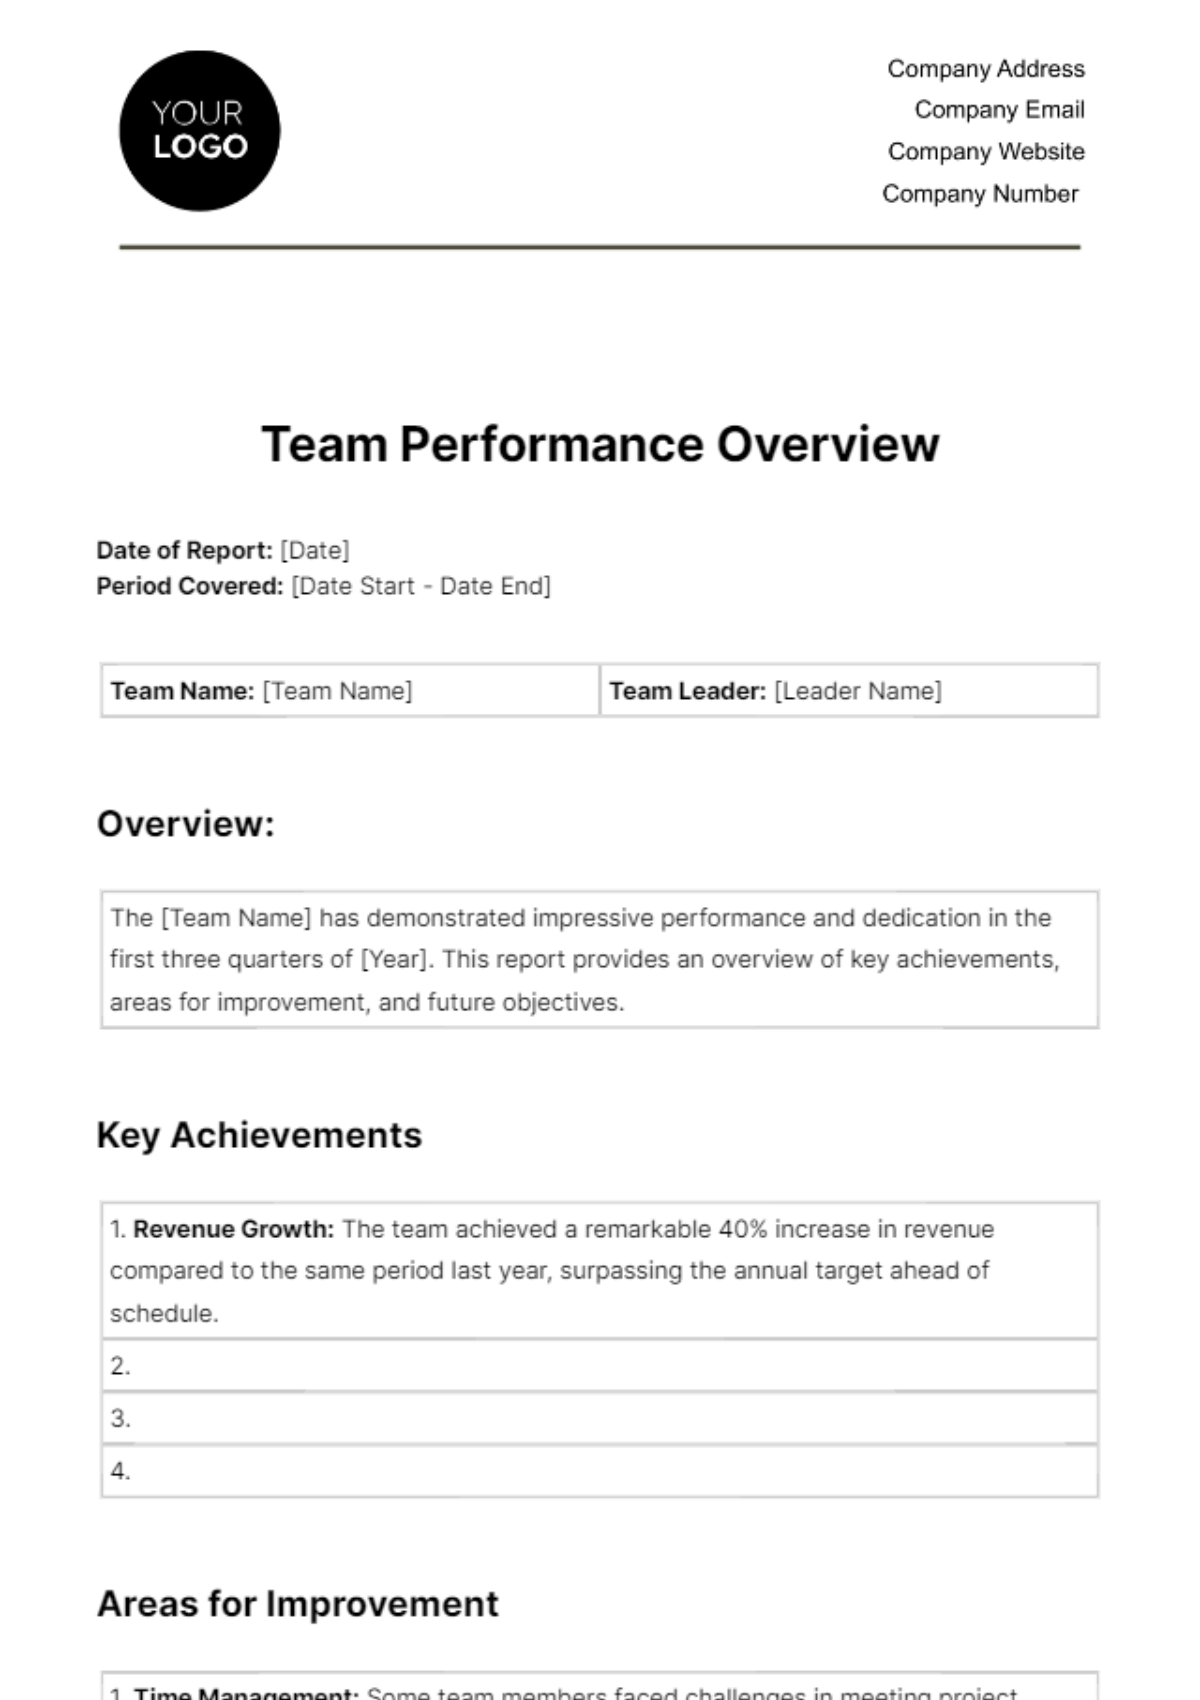 Team Performance Overview HR Template